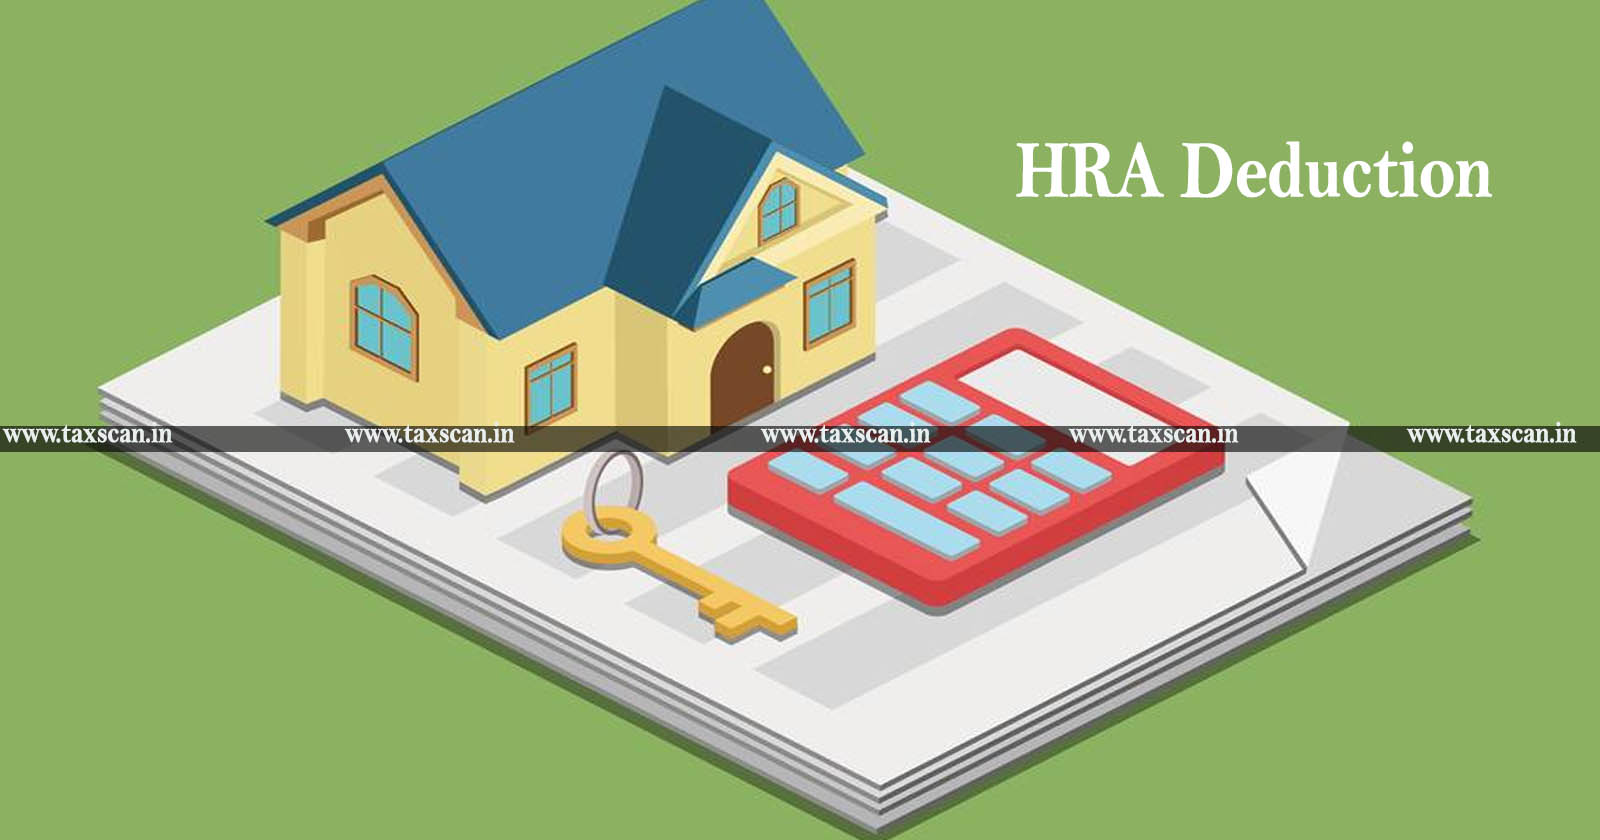 Rent Paid to Wife Eligible for HRA Deduction - Income Tax Act - ITAT - TAXSCAN